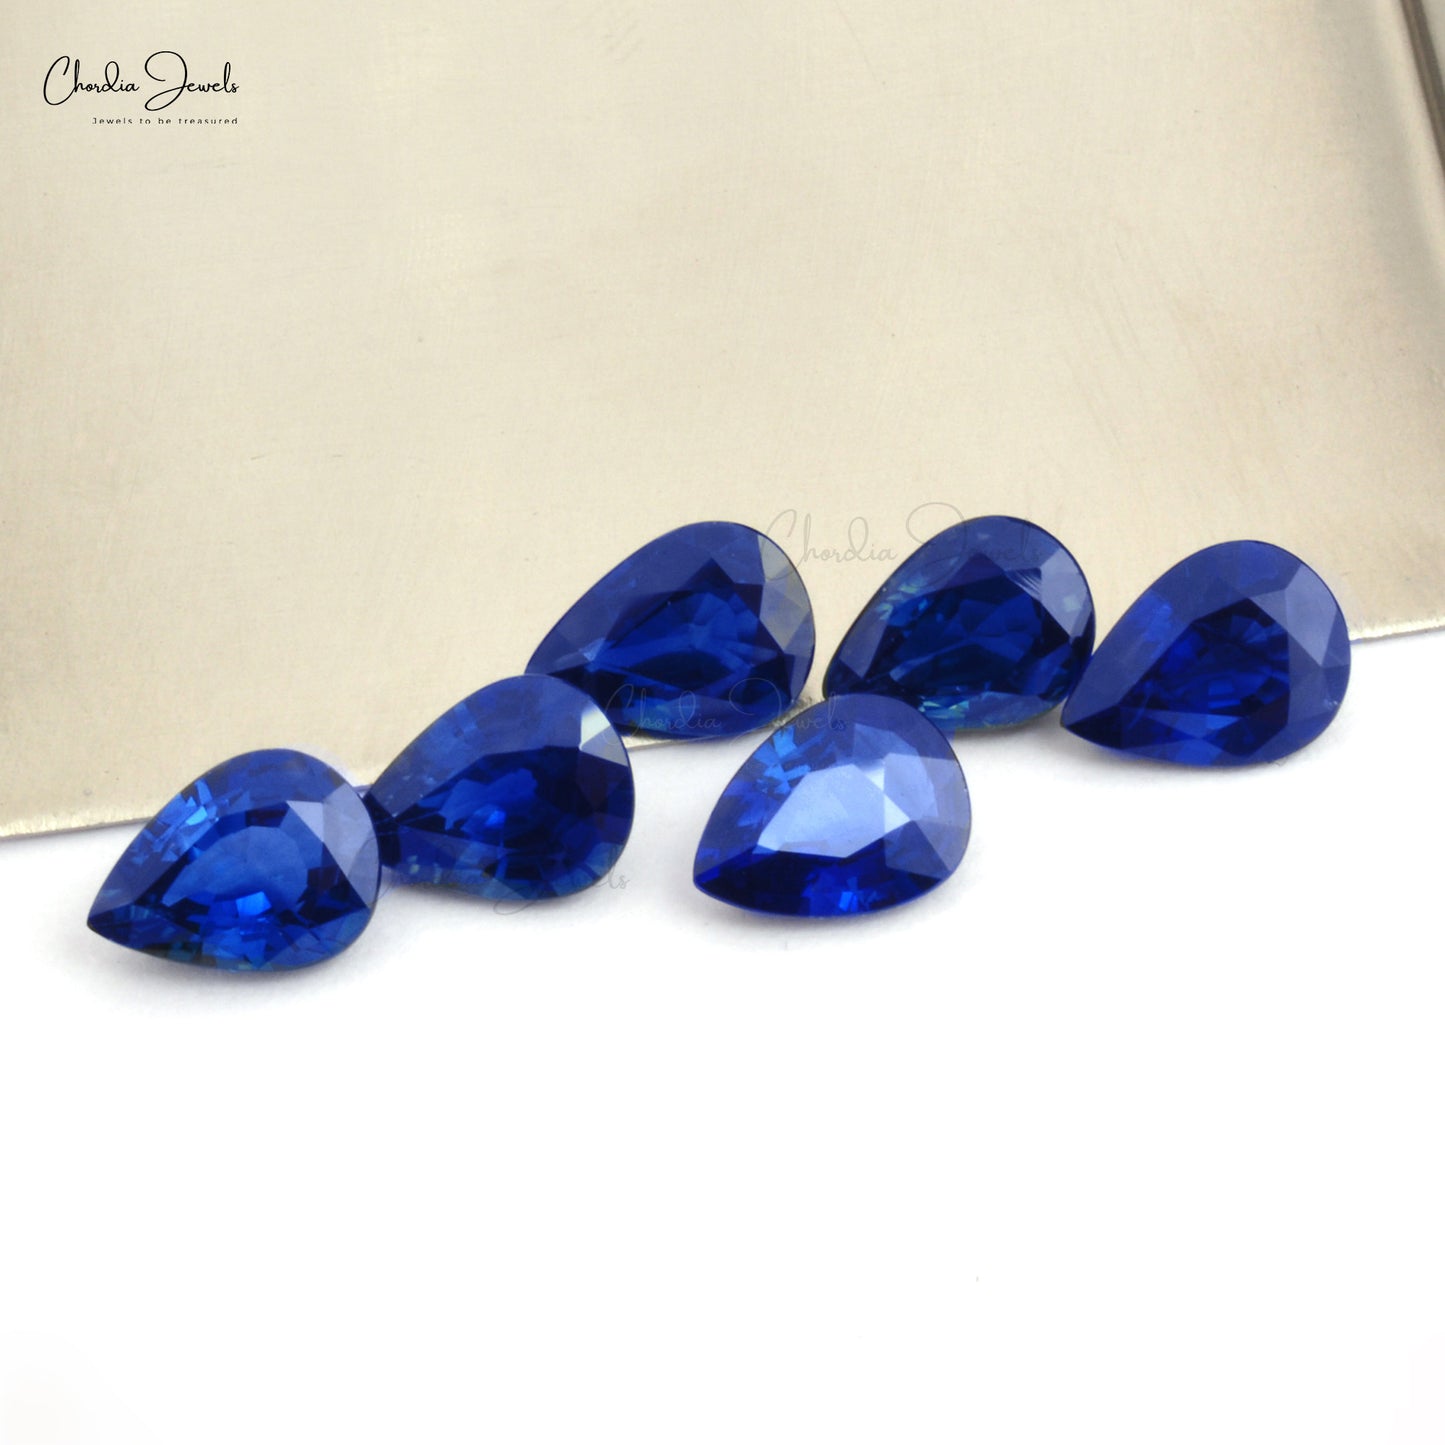 Load image into Gallery viewer, Blue Sapphire Stone
